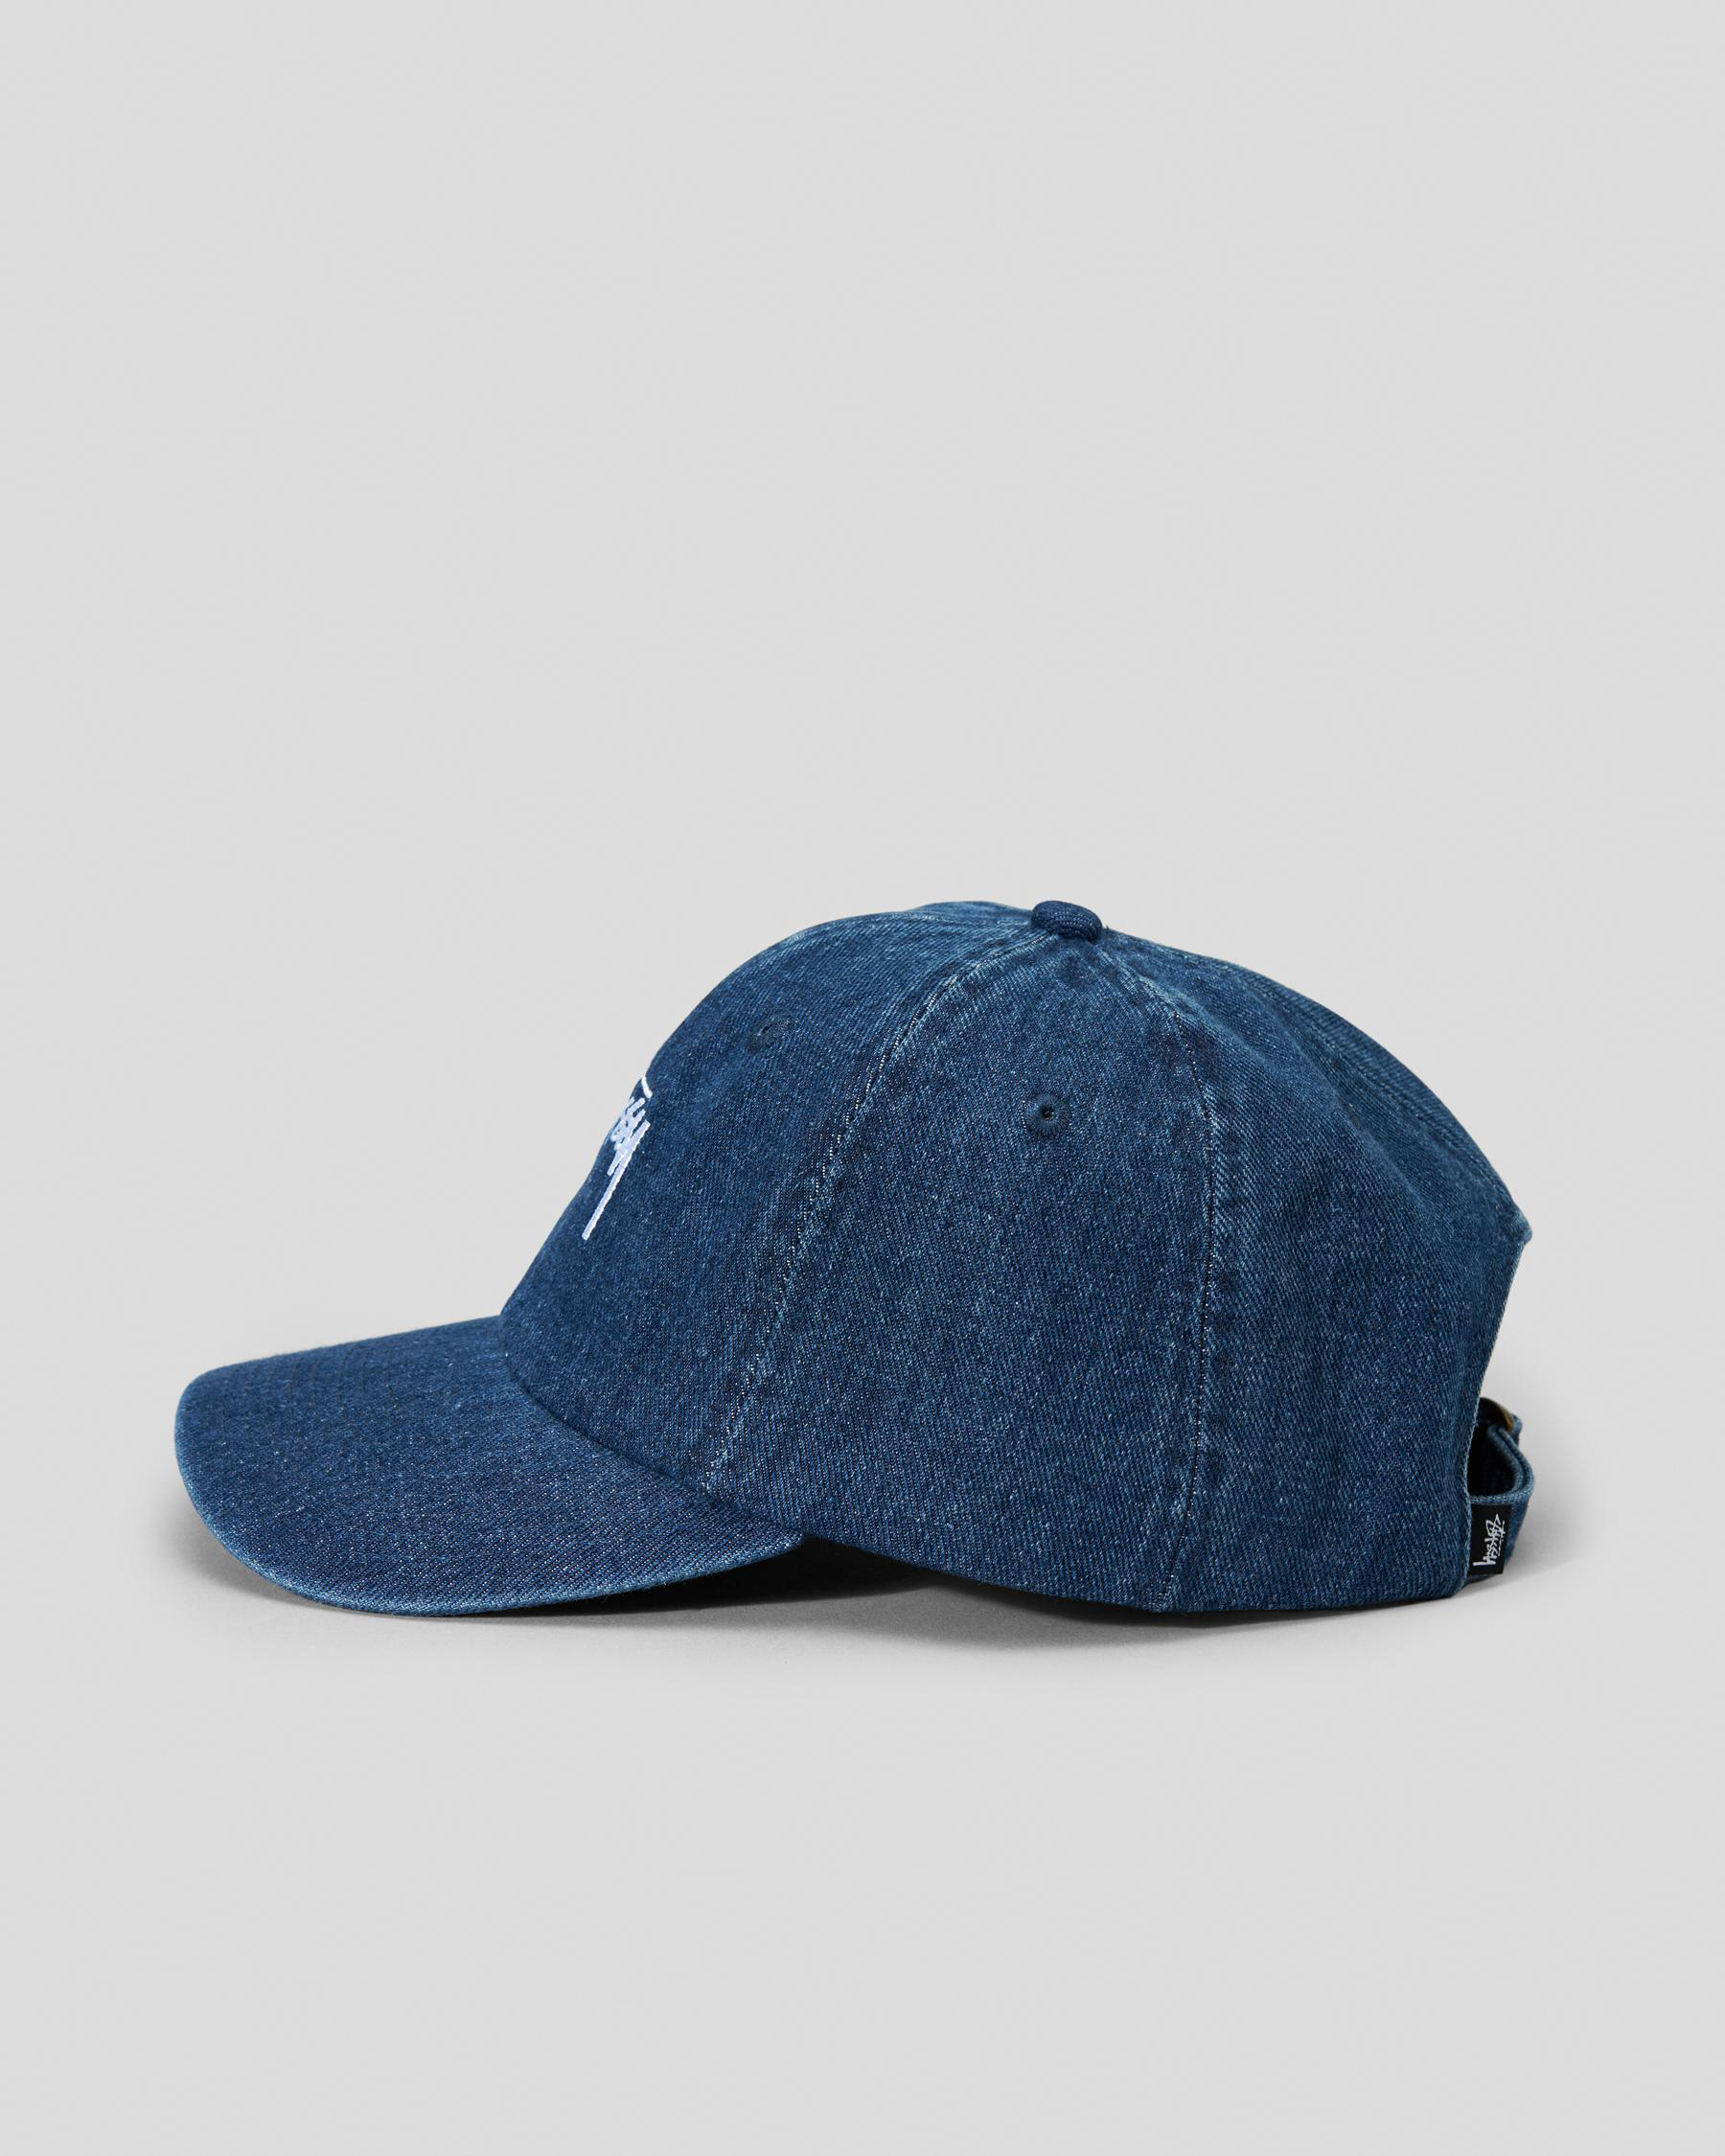 Shop Stussy Stock Low Pro Cap In Washed Navy Denim - Fast Shipping ...